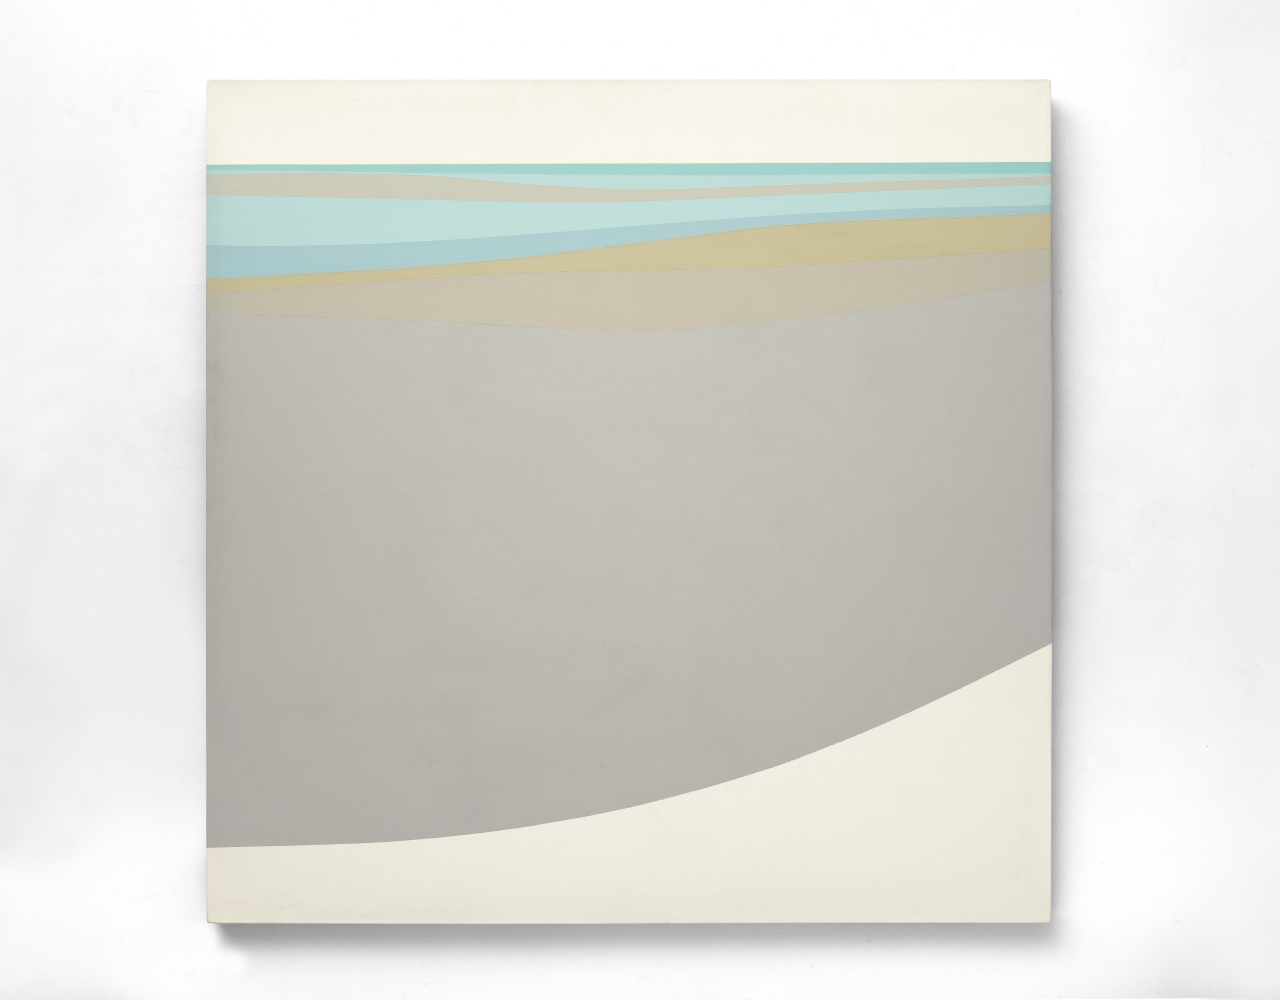 Helen Lundeberg (1908-1999) Seashore, 1969 acrylic on canvas 60 x 60 inches; 152.4 x 152.4 centimeters LSFA# 11596